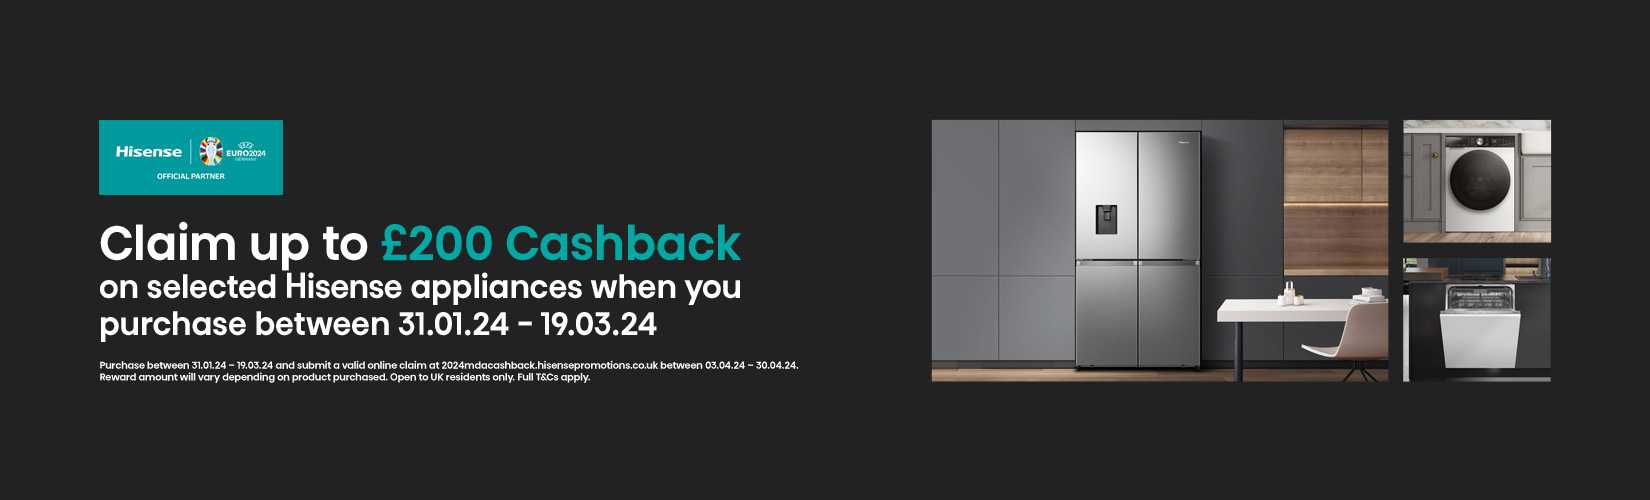 Claim up to £200 cashback on selected Hisense appliances when you purchase between 31.01.24 - 19.03.24.